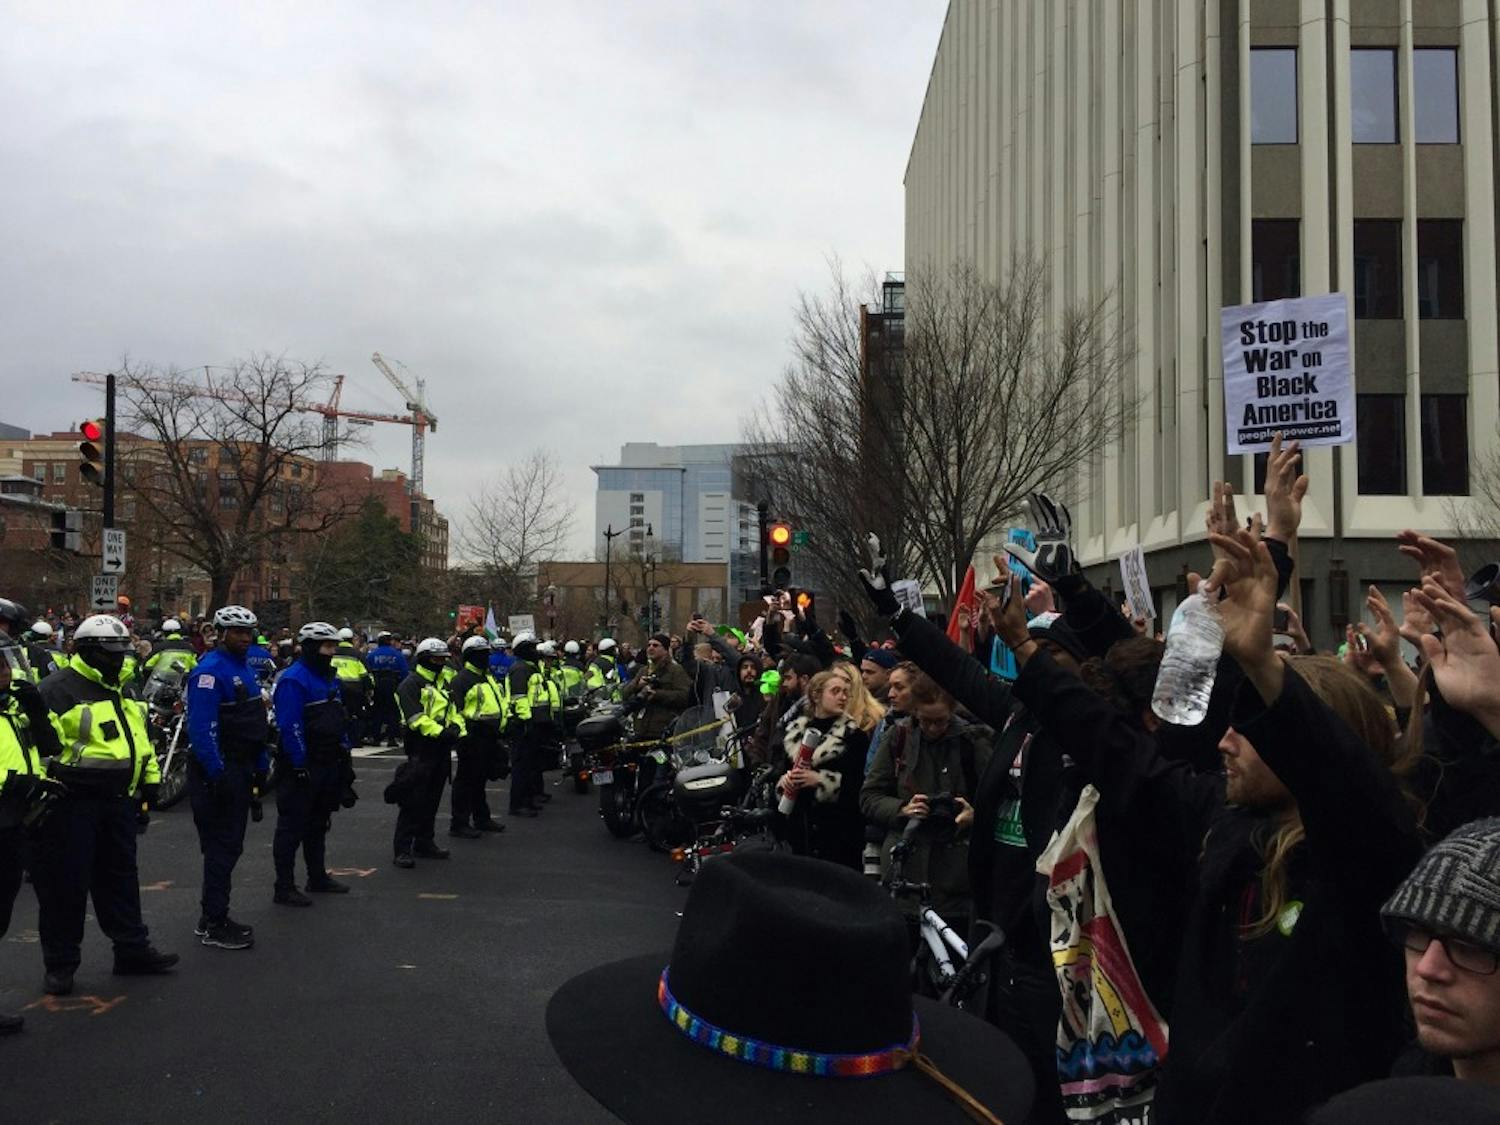 A group of protesters face off with police officers &mdash; less than 3 minutes before pepper spray was reportedly released.&nbsp;